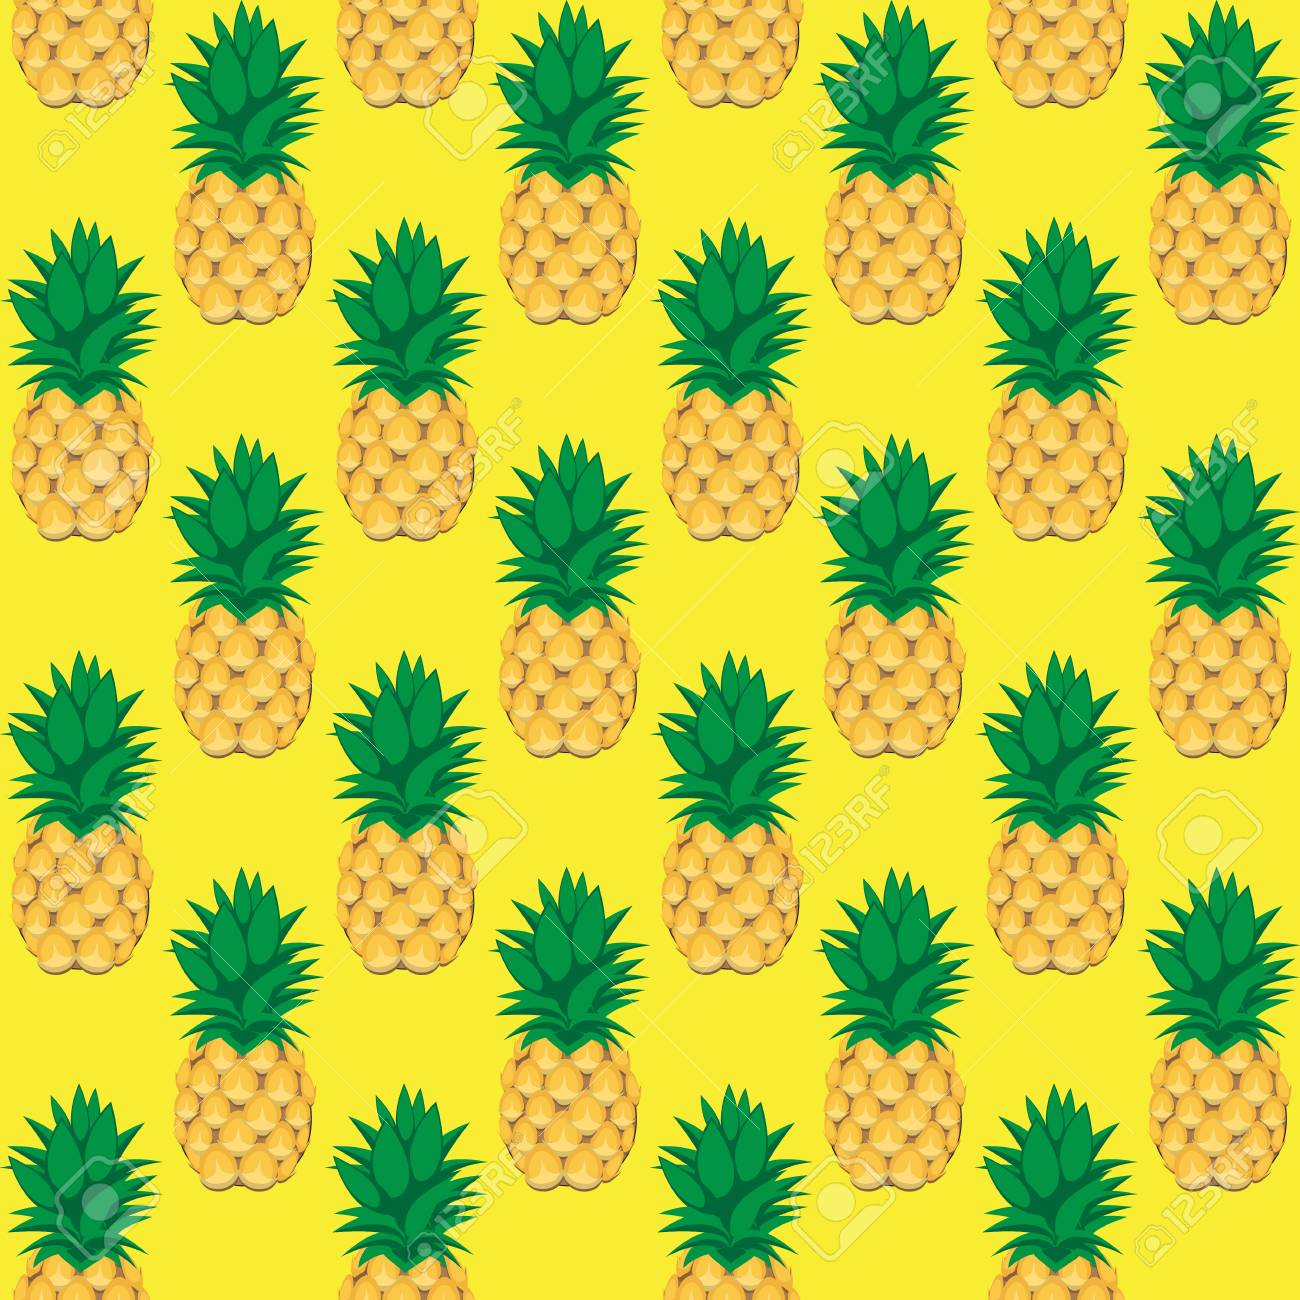 Pineapple Fruit Contour Abstract Seamless Pattern On Yellow